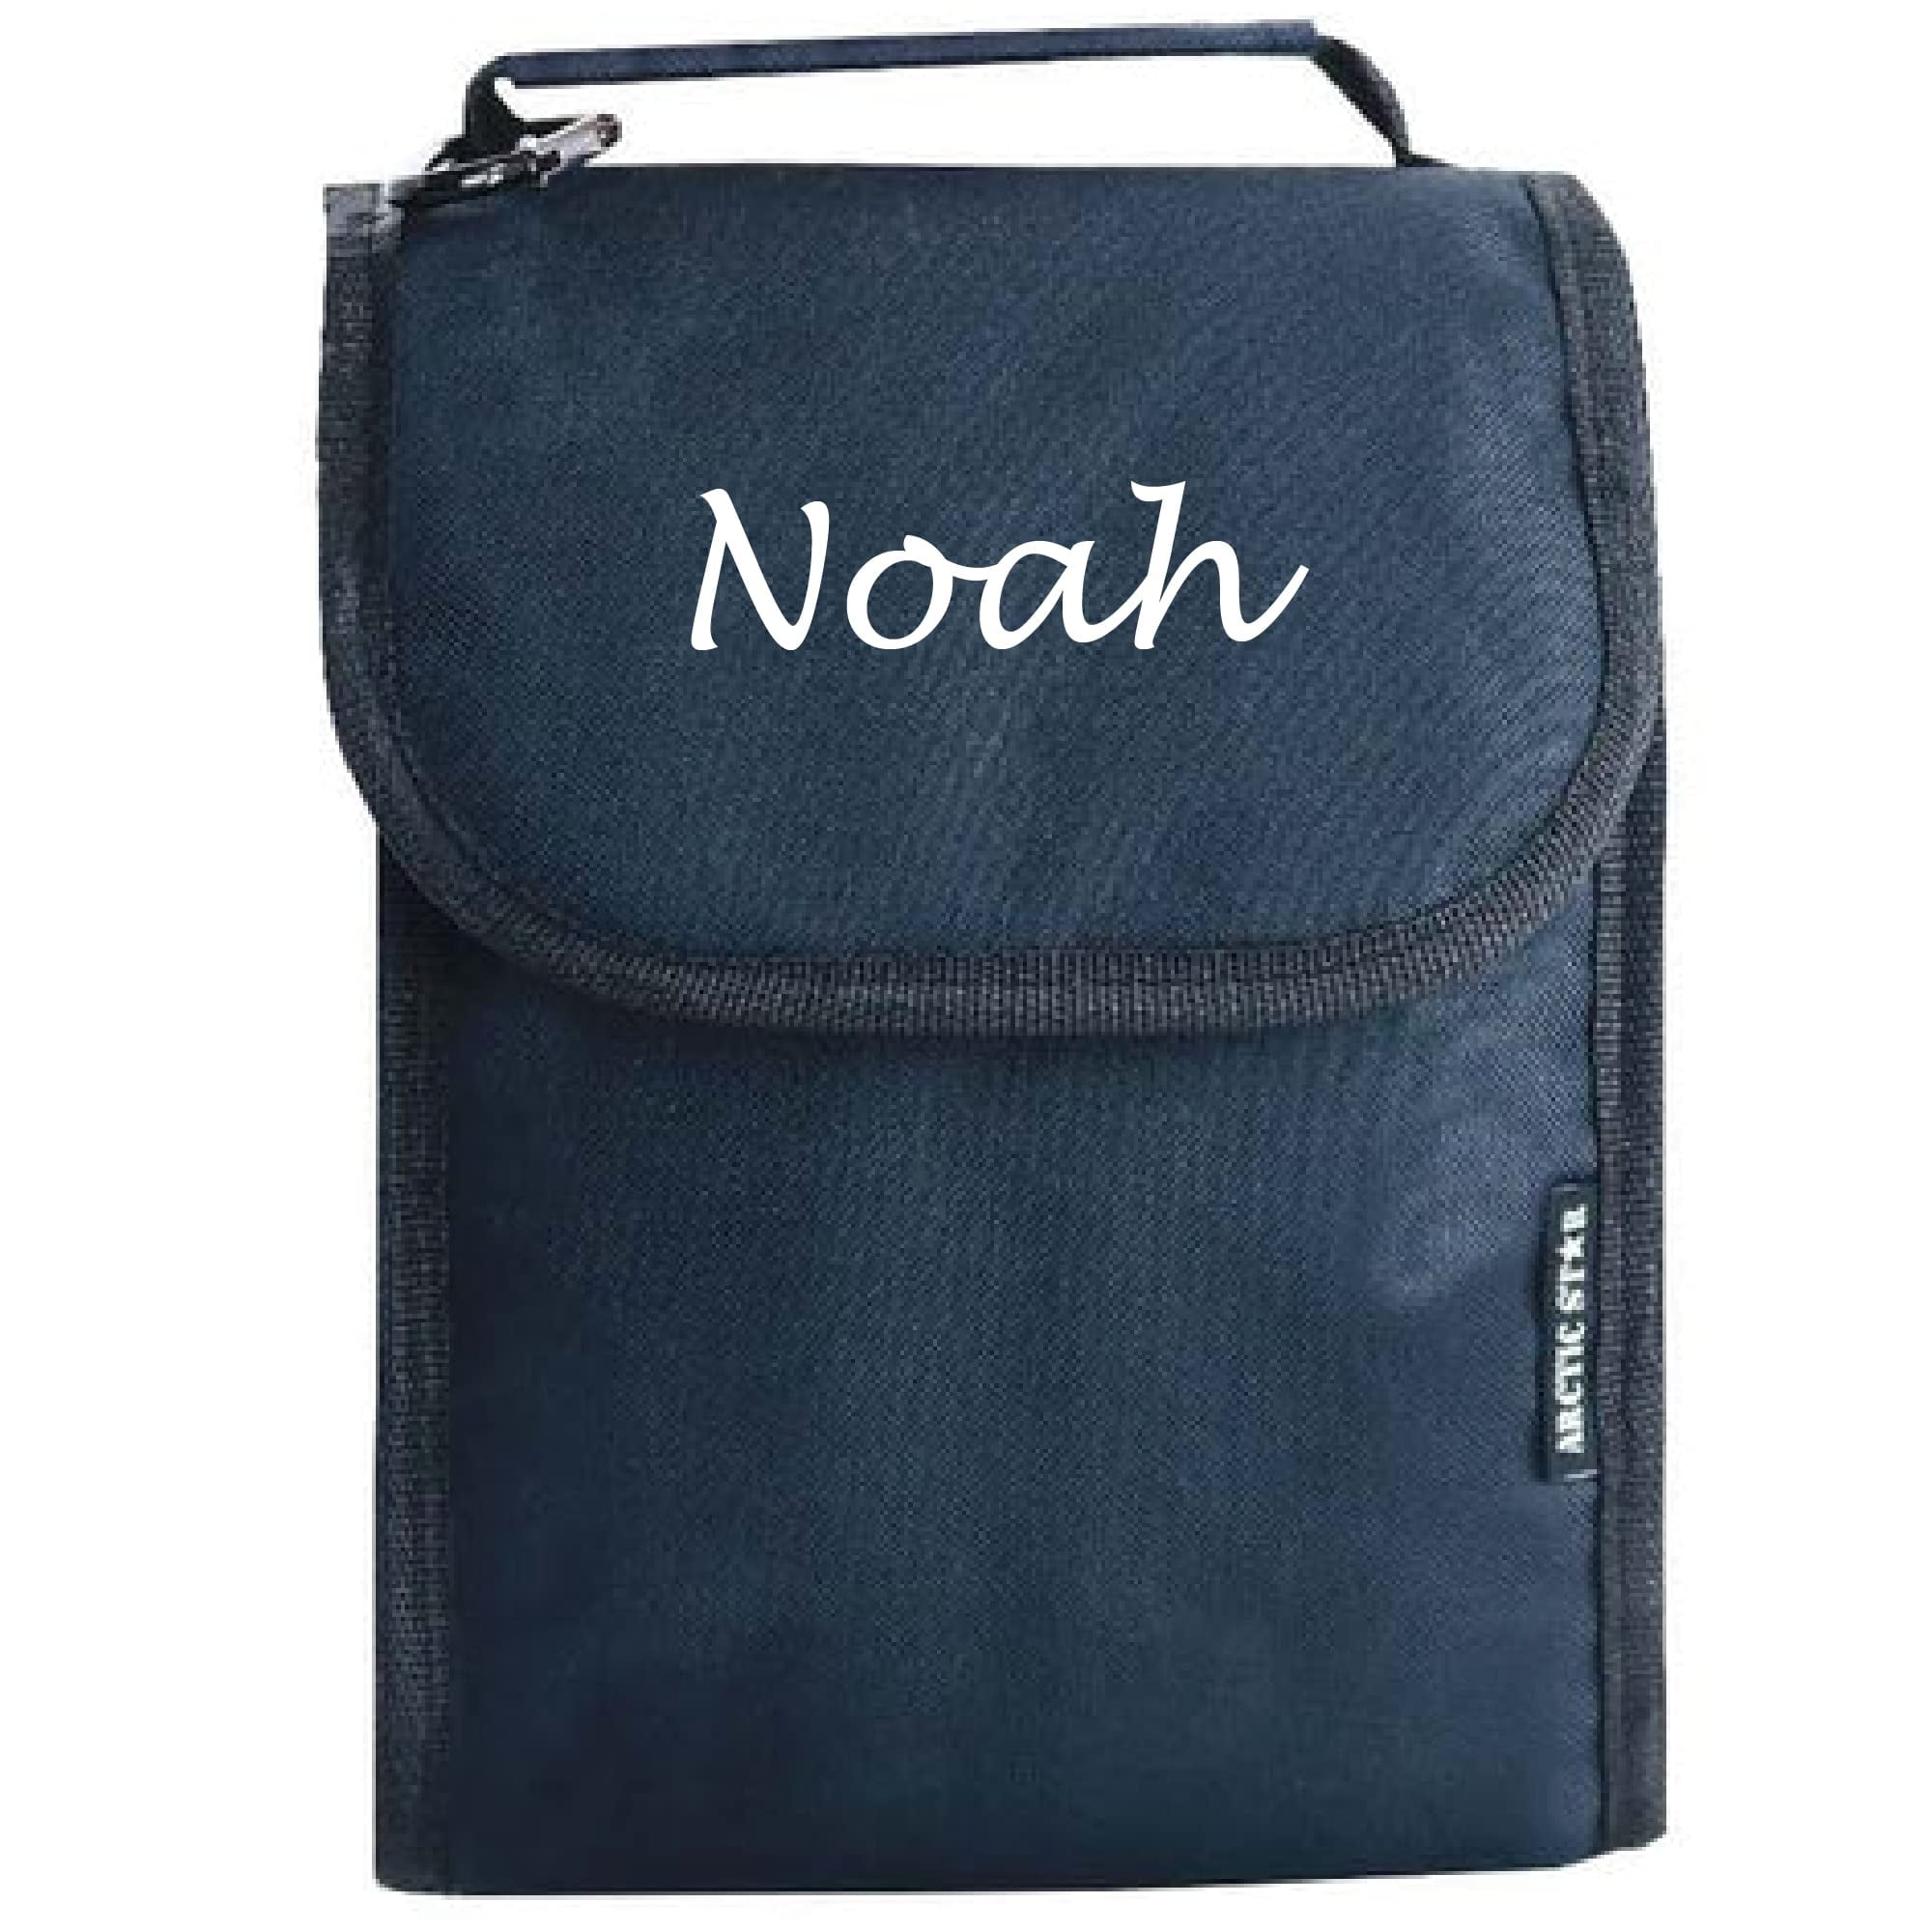 Personalized Passion Personalized Kids Lunch Bag - Kids Lunch Box For Girls  & Boys - Insulated Reusable Lunch Bags - Tough Polyester Kids Lunchbox Gift  With Custom Name - Ideal For School